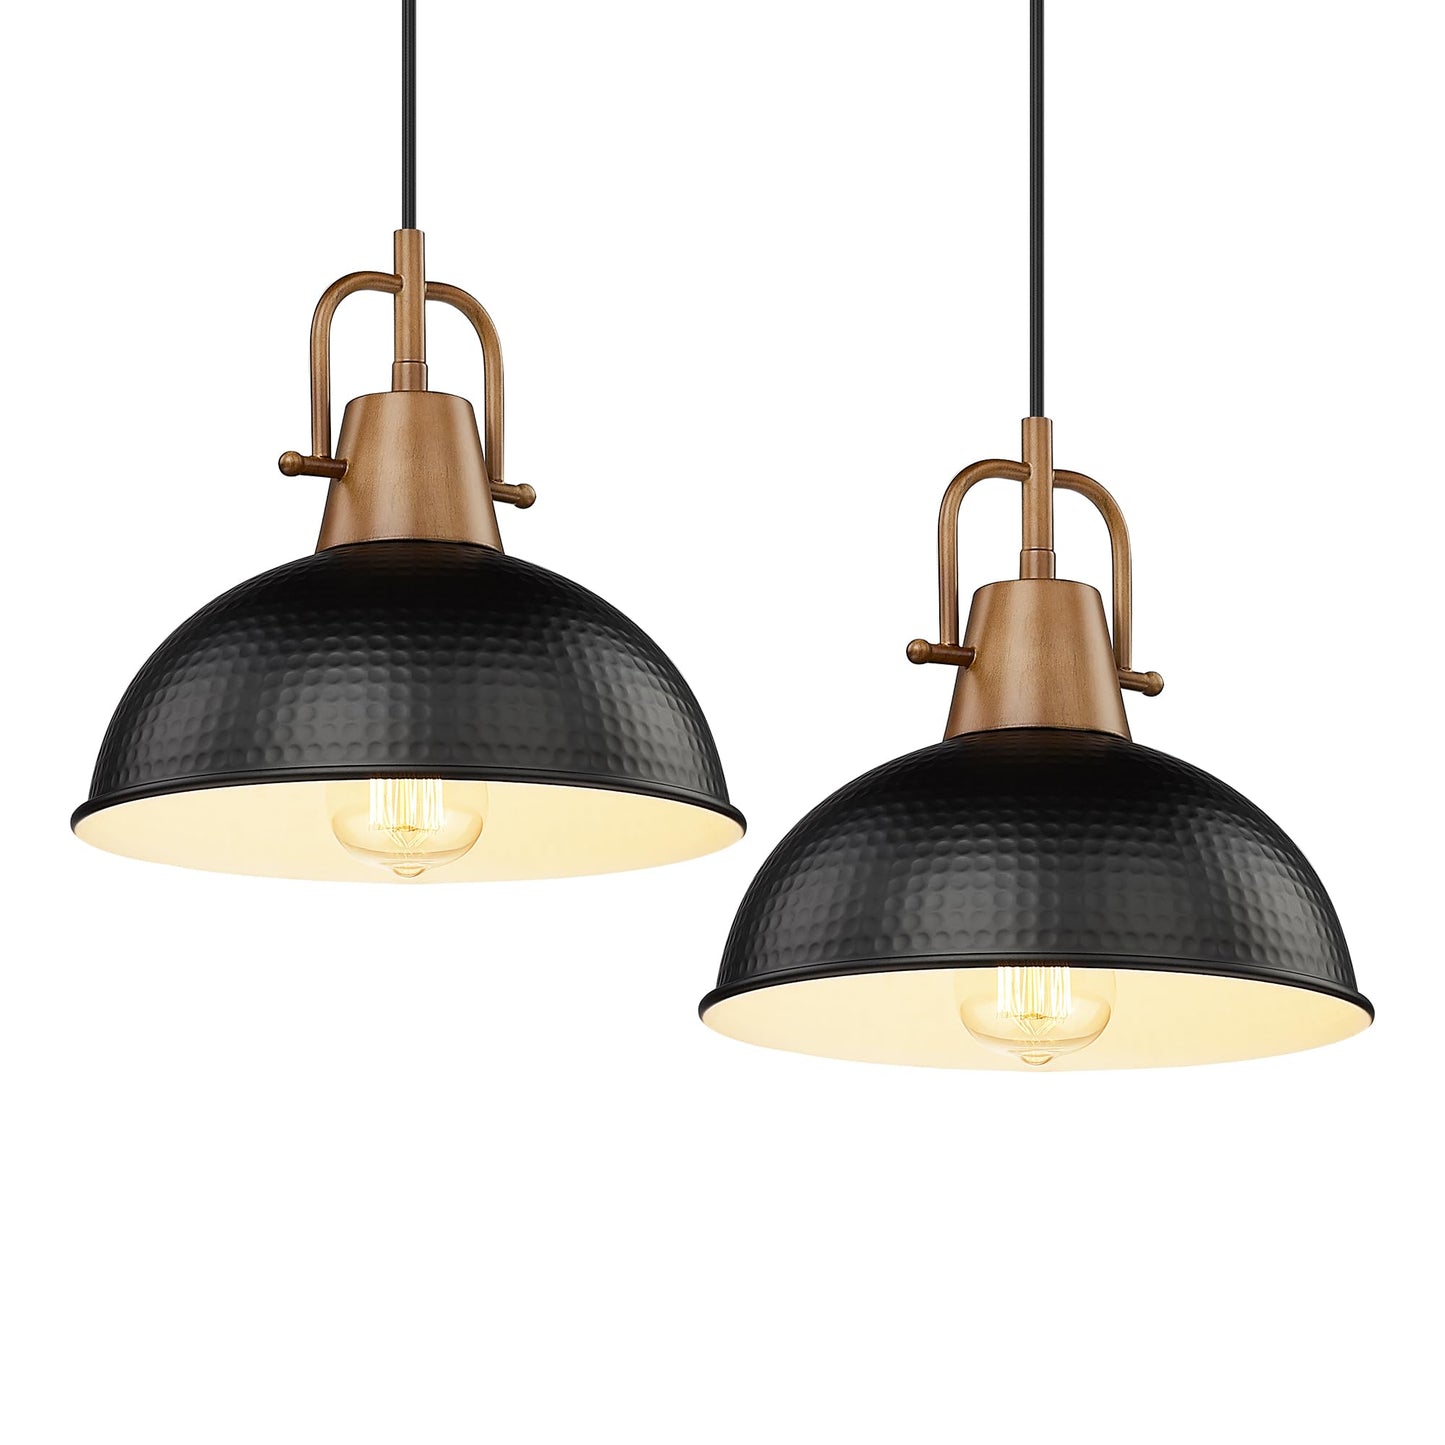 
                  
                    Emliviar 2 Pack Farmhouse Hanging Lamps, 10.2" Pendant Lighting Fixtures with Hammered Metal Shade for Kitchen Bedroom, Black Finish, GE269MIL-2 BK+WD
                  
                